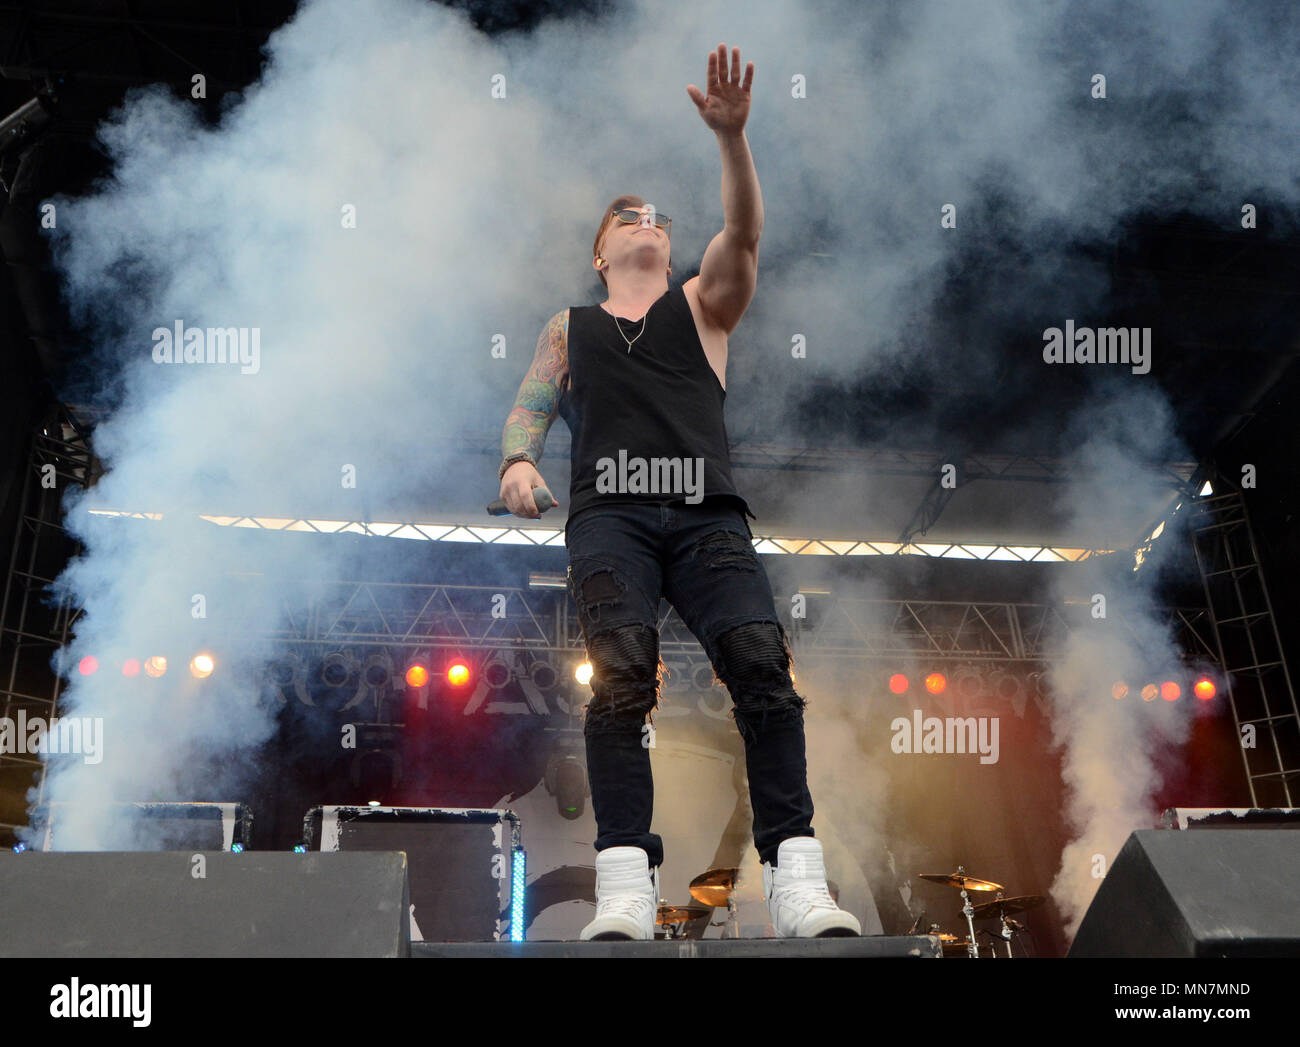 Somerset, Wisconsin, USA. 12th May, 2018. Lead singer Jesse Barnett of the  band Stick To Your Guns performs during the Northern Invasion Music  Festival in Somerset, Wisconsin. Ricky Bassman/Cal Sport Media/Alamy Live